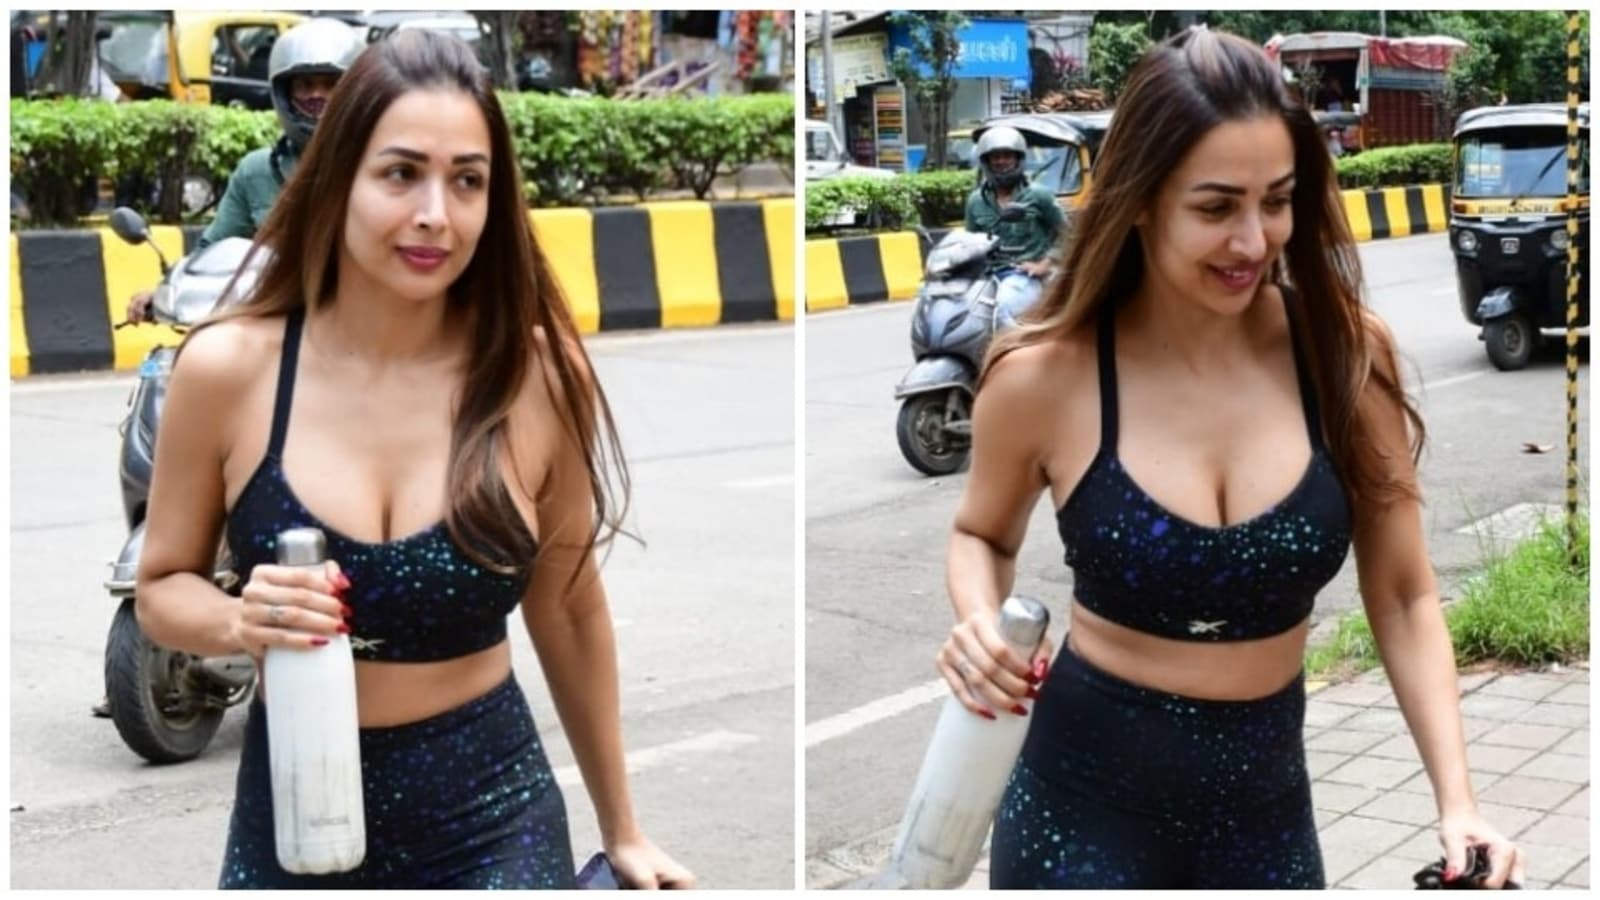 Malaika Arora oozes oomph in gym wear, steps out in racer-back sports bra  and leggings - IN PICS | News | Zee News